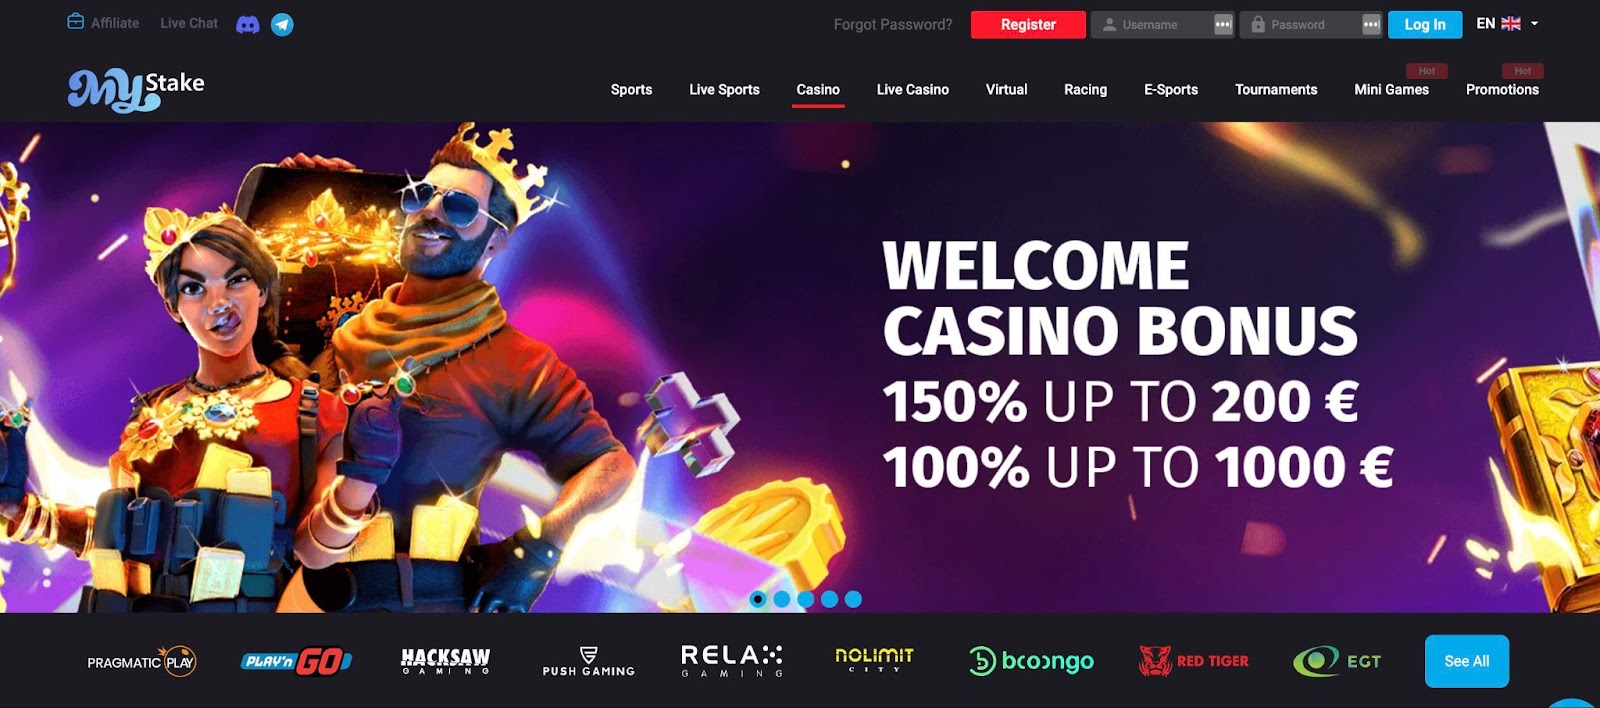 My Stake is a gambling site not on Gamstop